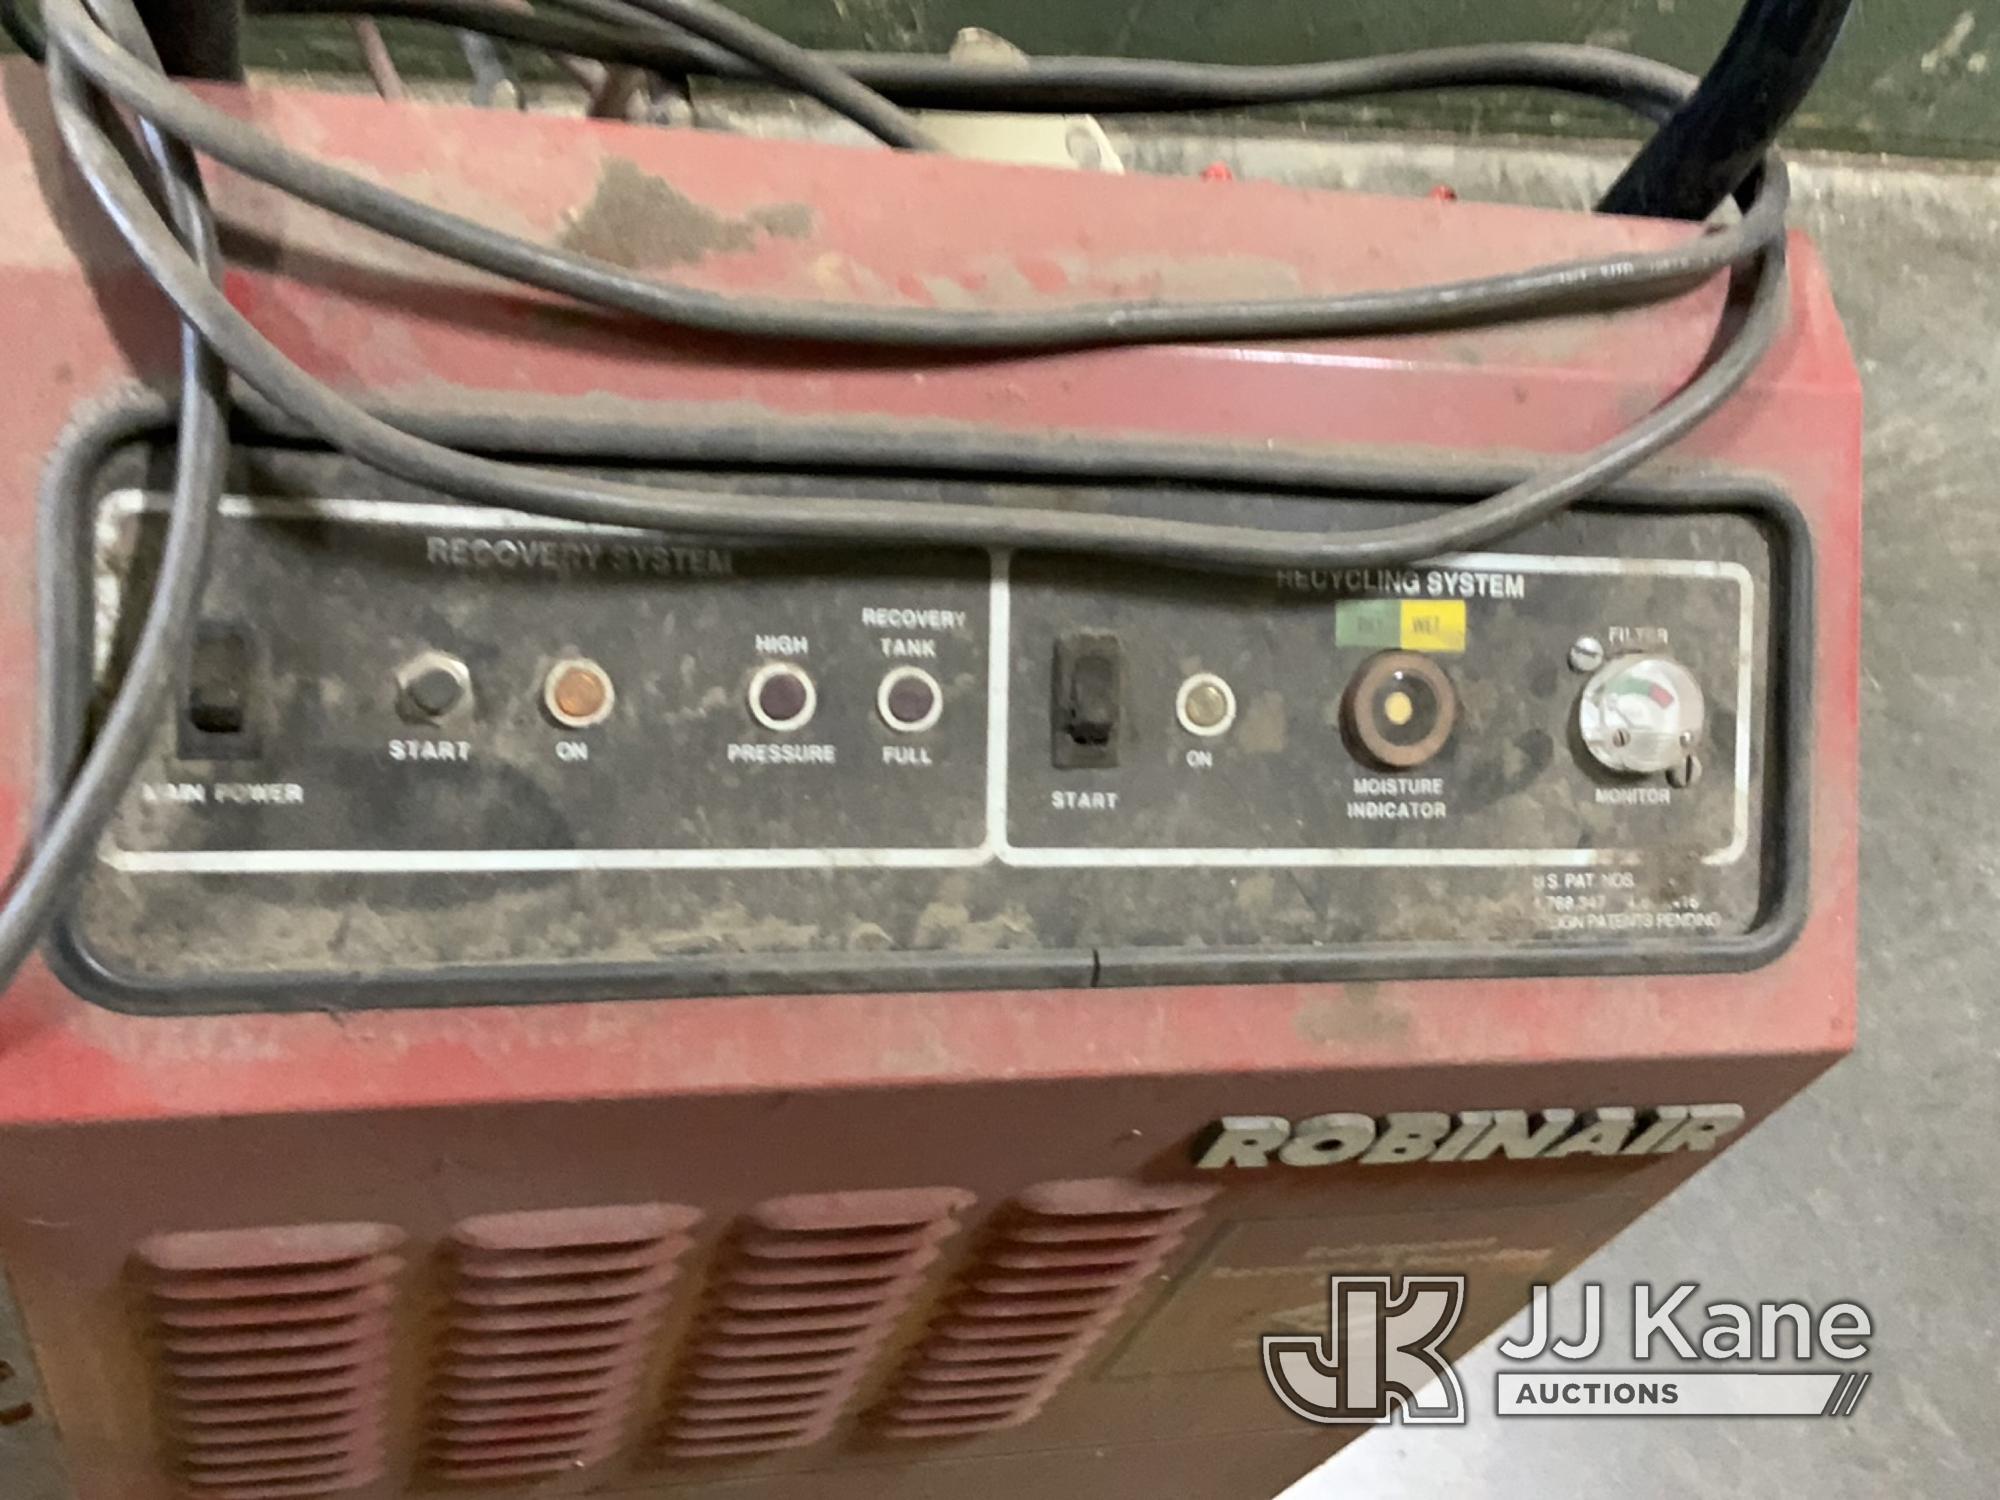 (Owensboro, KY) Robinair Refrigeration Recovery Recycle System w/ 2 Spare Tanks Not Running, Conditi